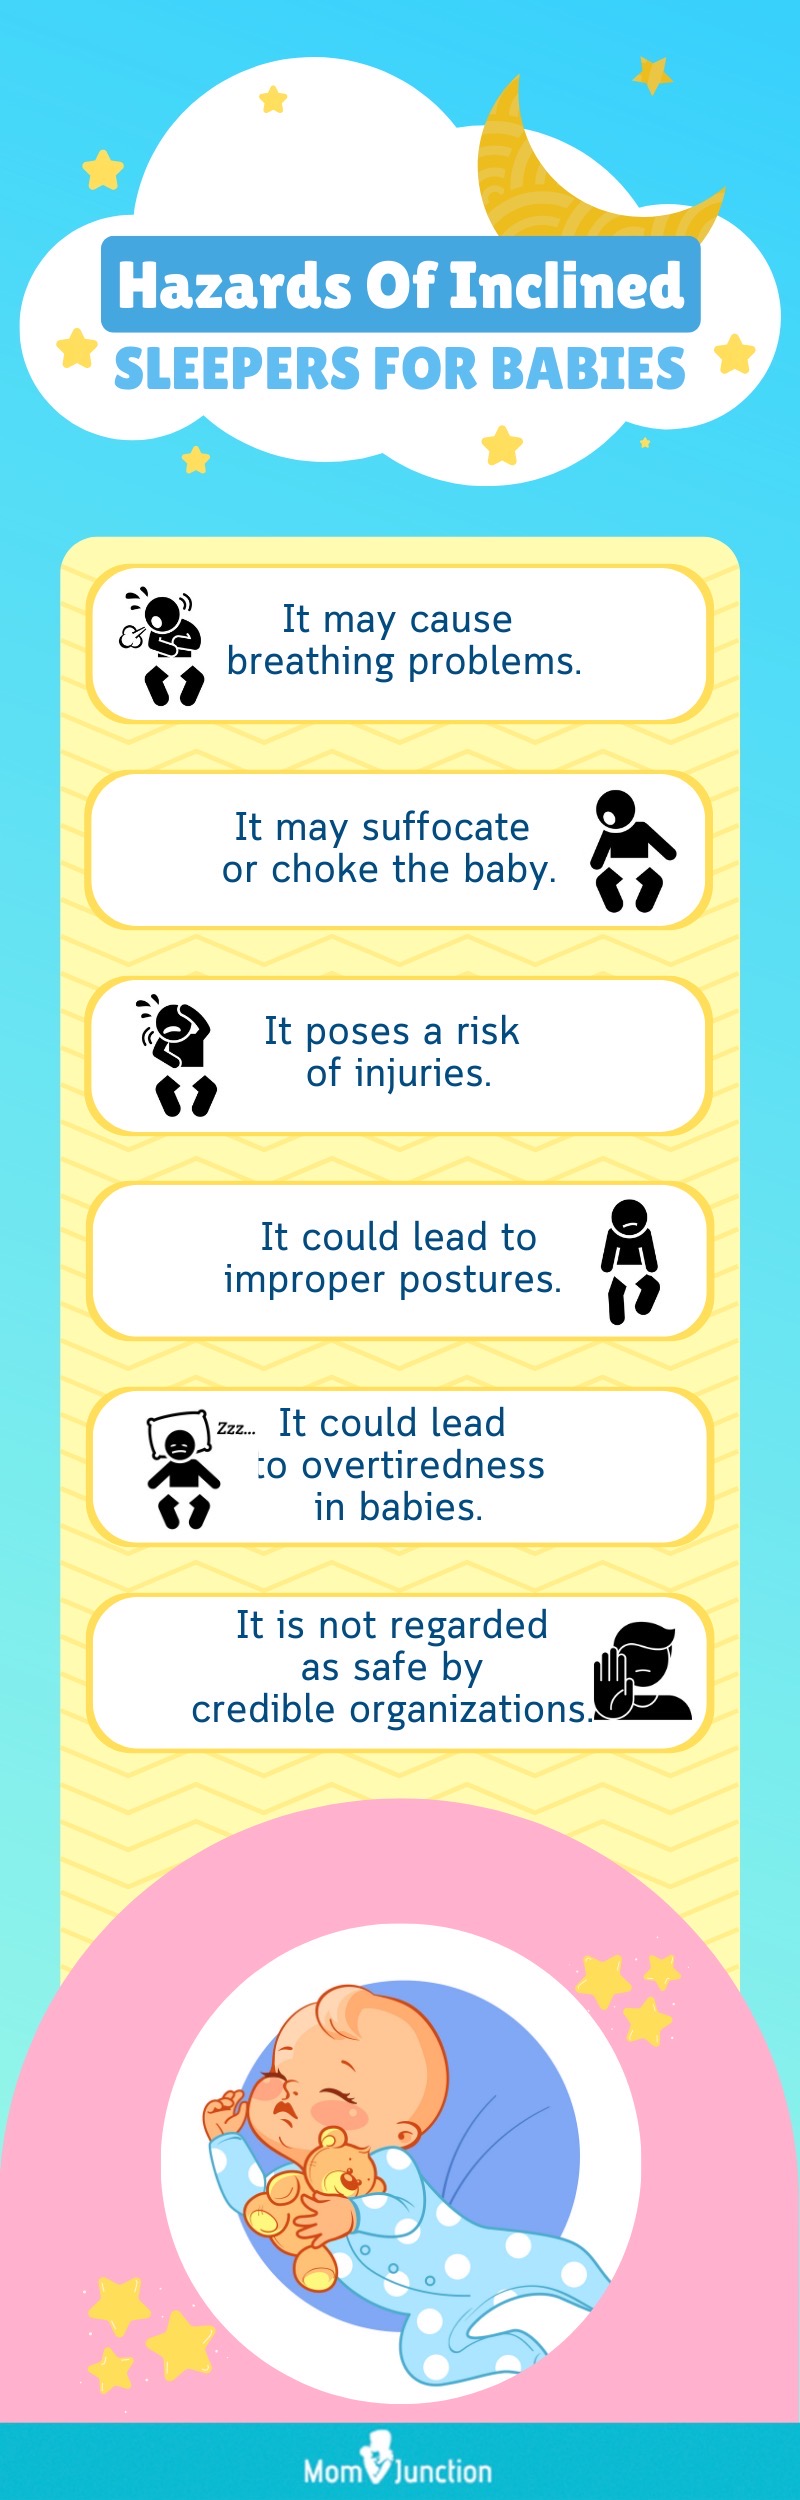 hazards of inclined sleepers for babies [infographic]